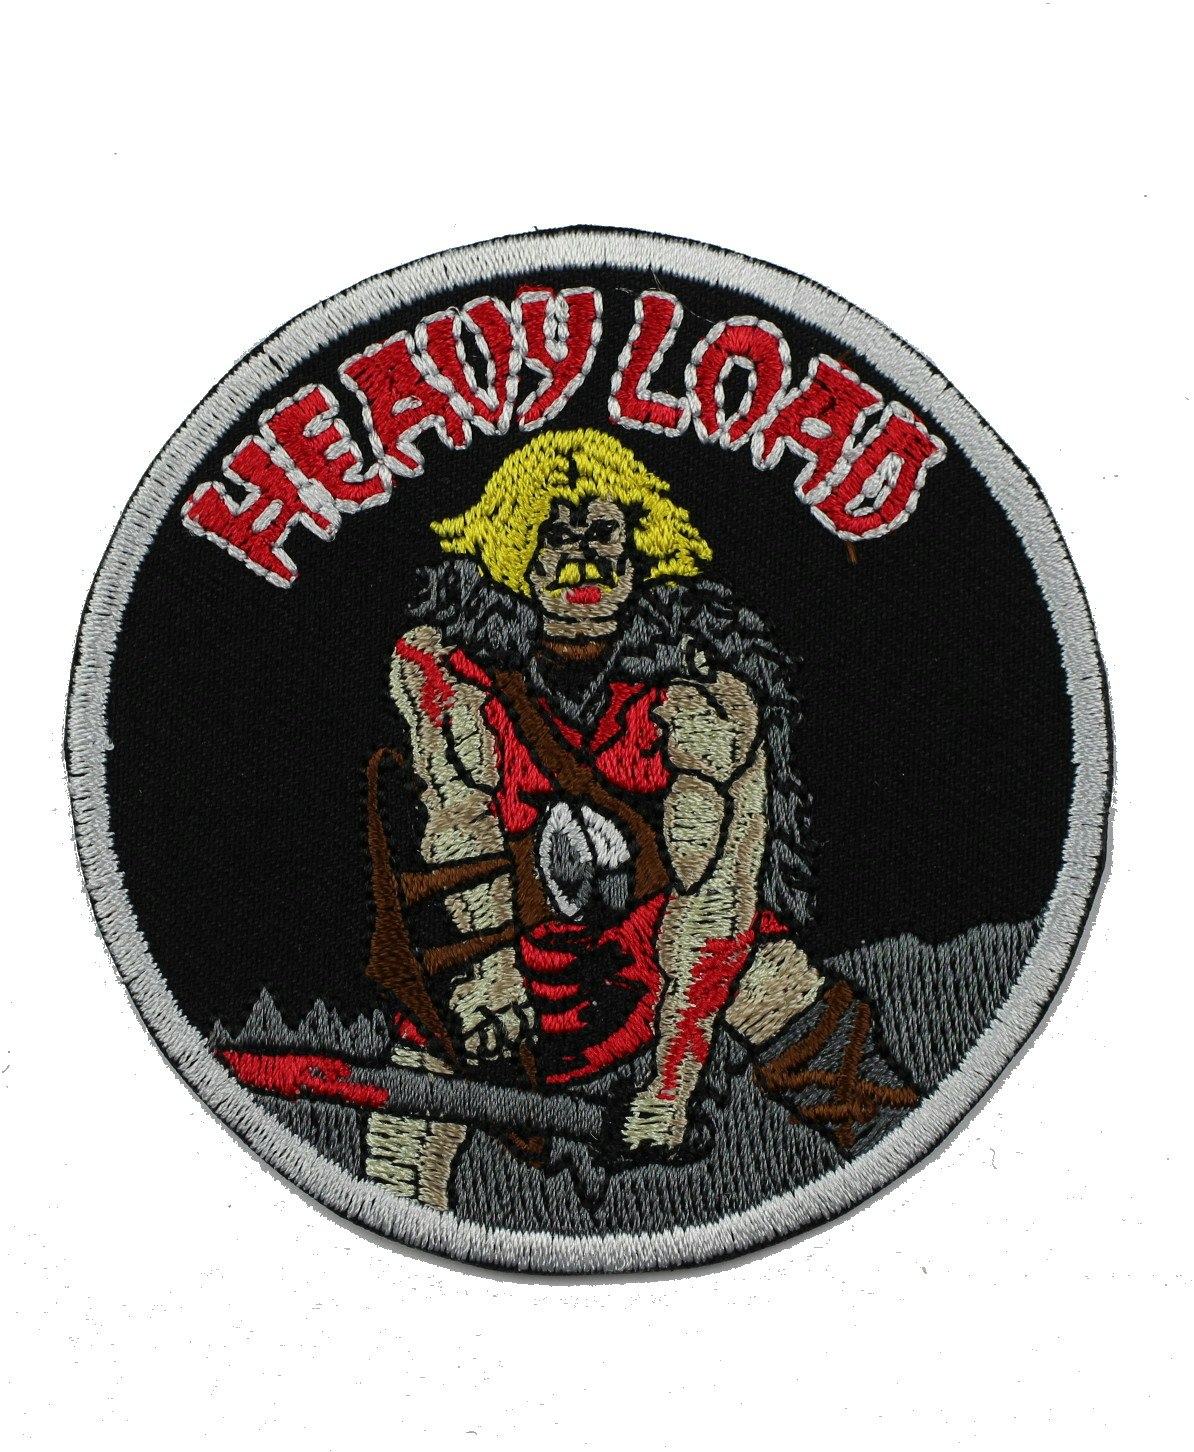 Heavy load Stronger than evil logo patch